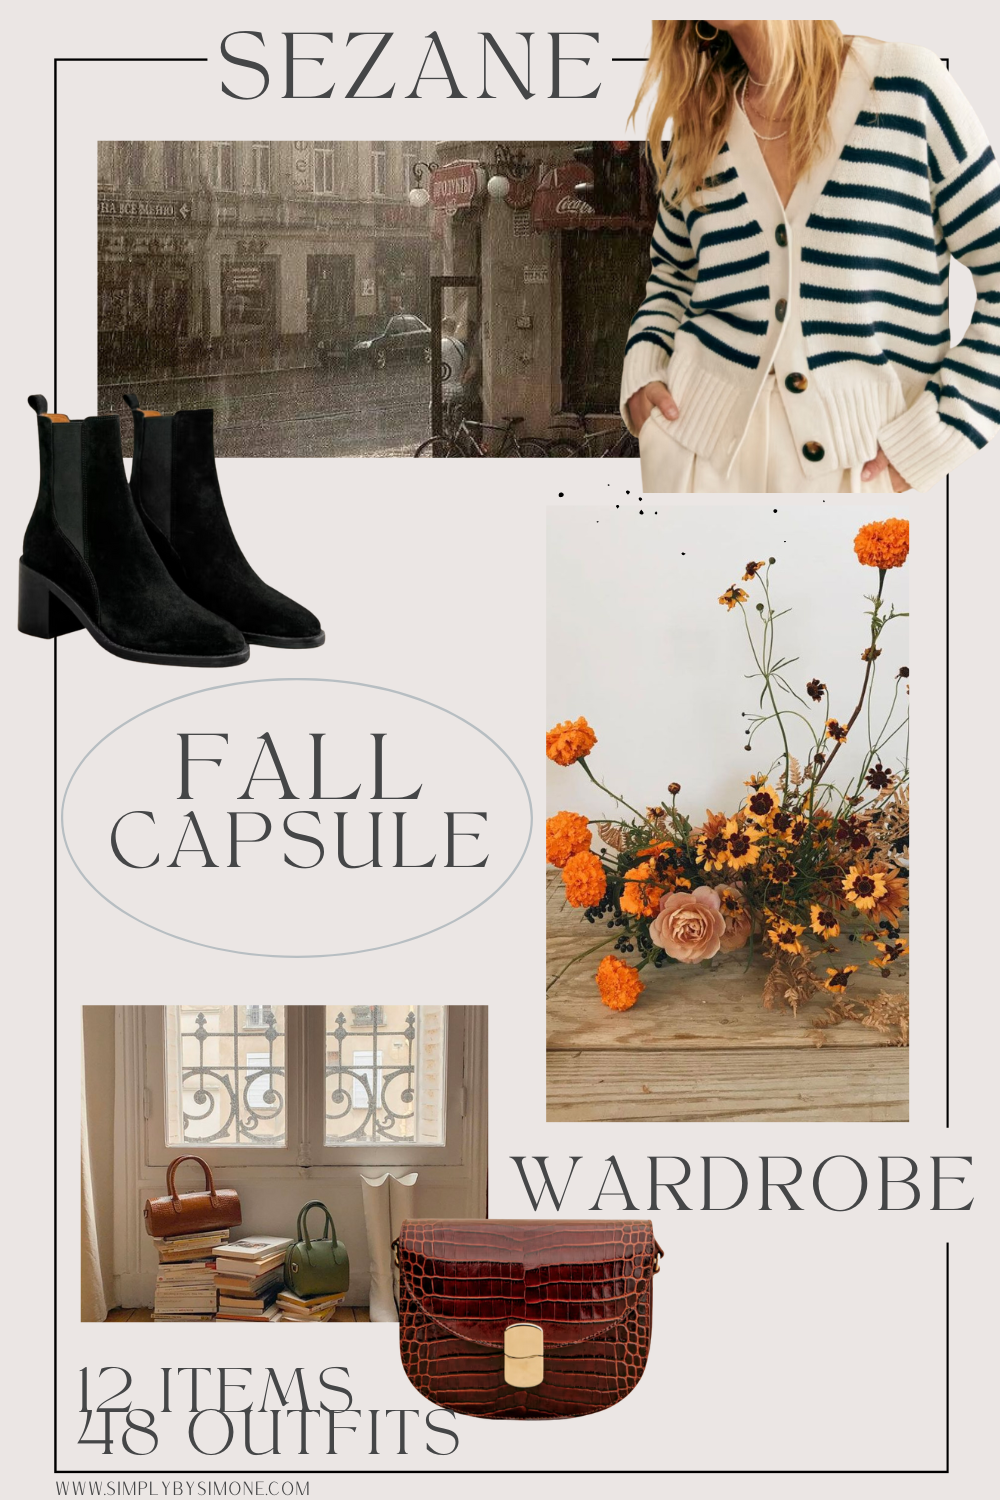 Sezane Fall Capsule Wardrobe – 12 Pieces, 48 Outfits - Simply by